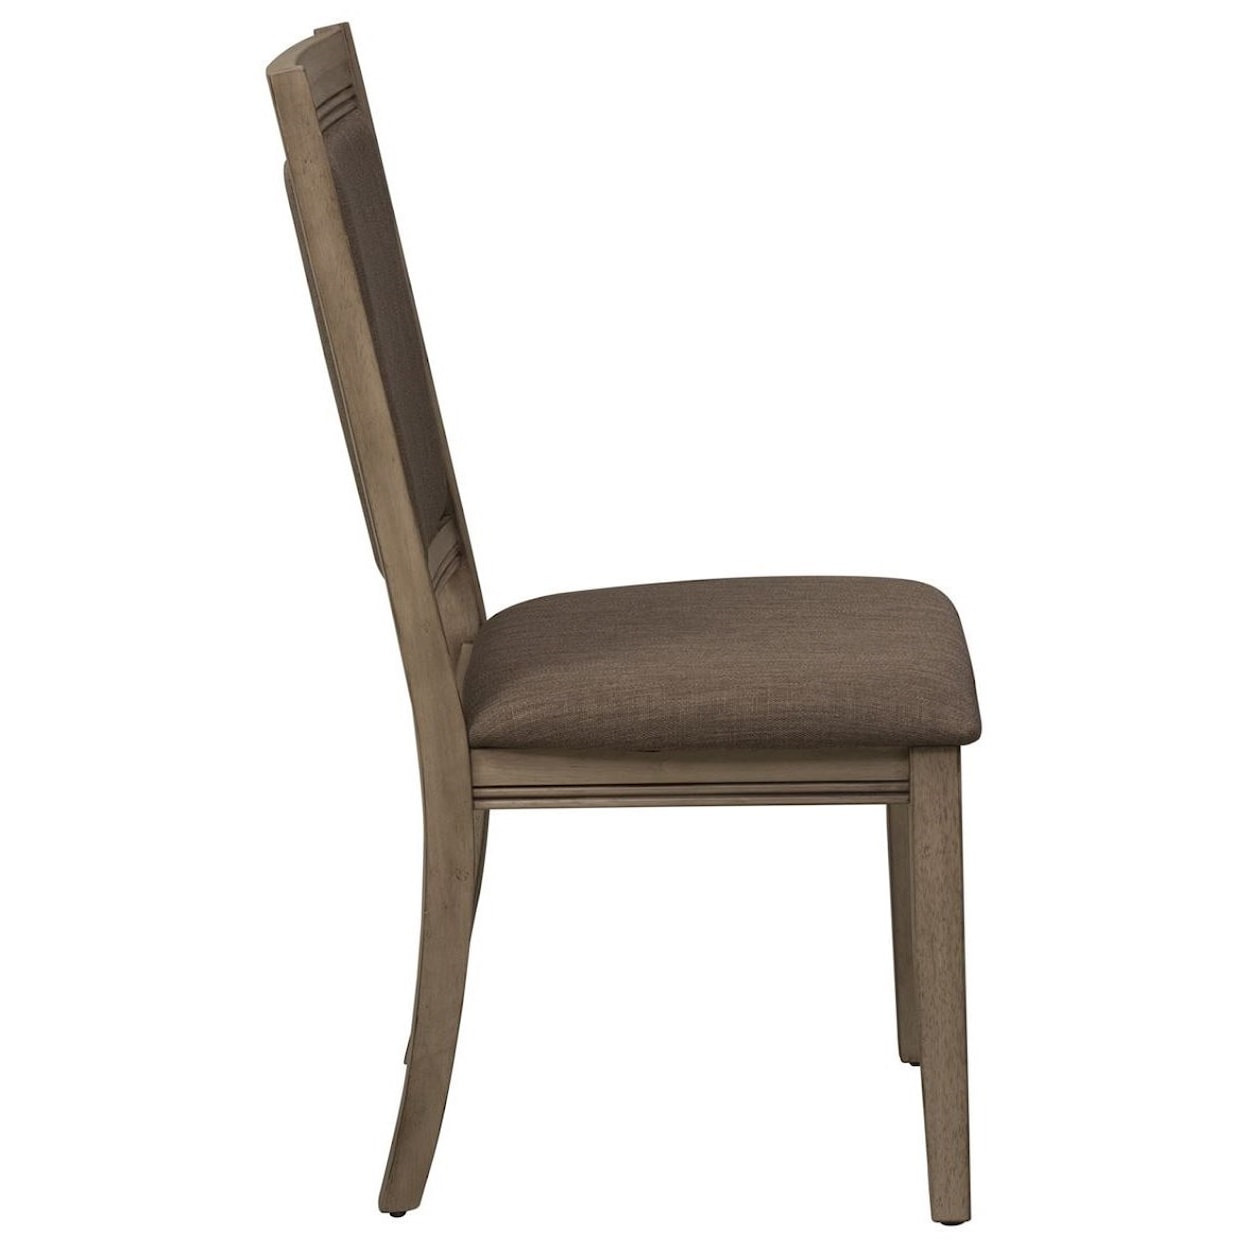 Libby Sun Valley Upholstered Side Chair